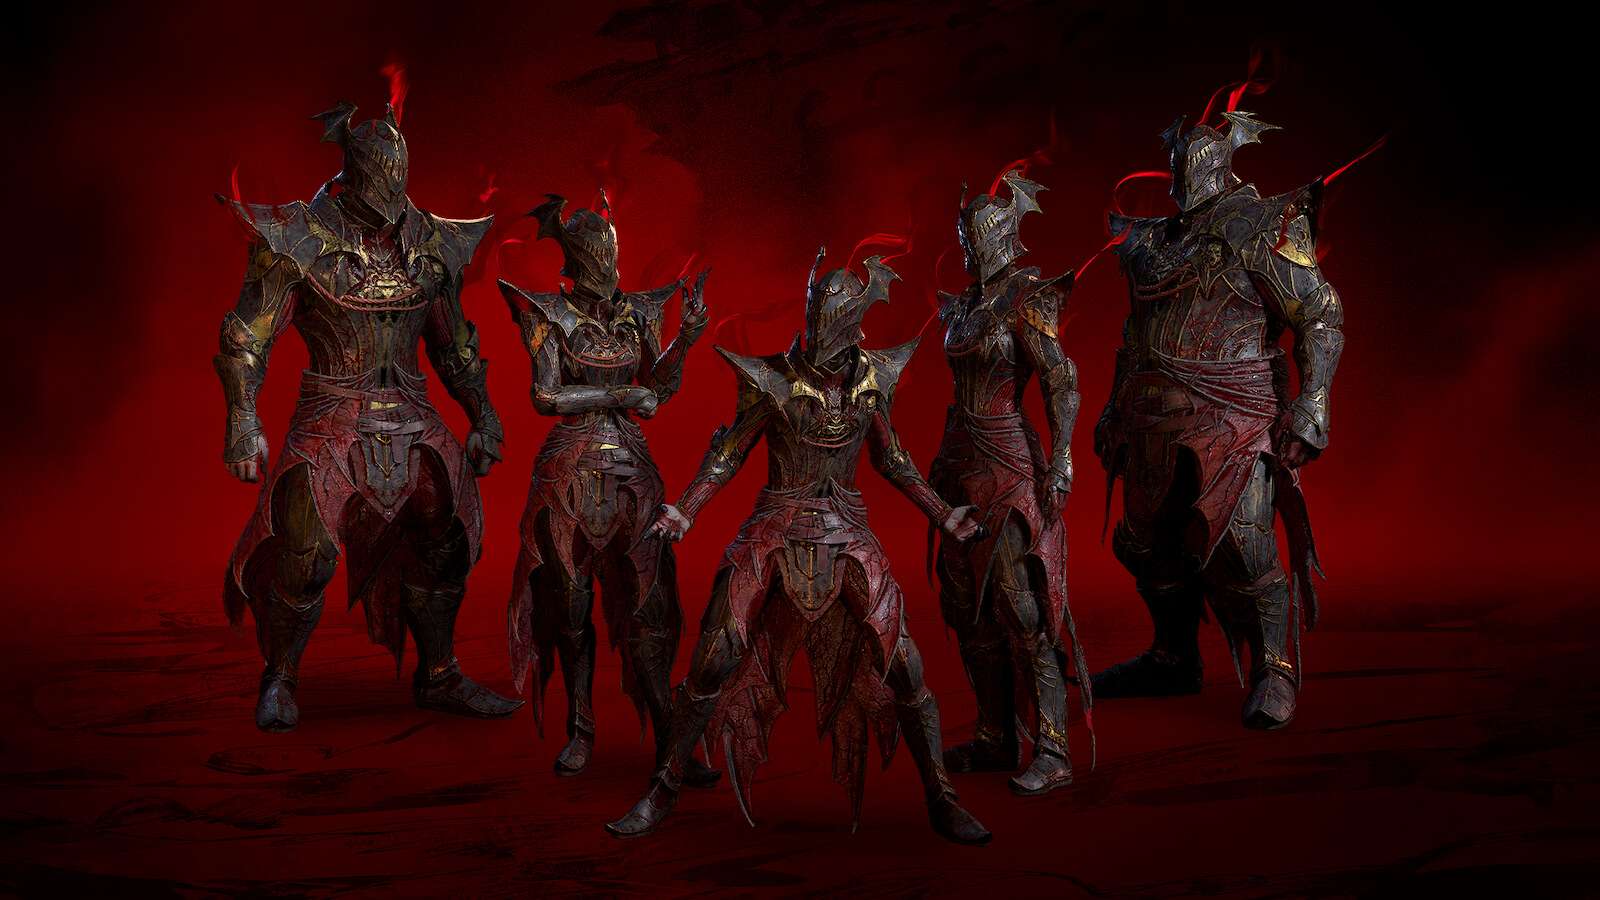 Diablo 4 players discover Blizzard can't do "simple math" as Season 2 trailer gets deleted